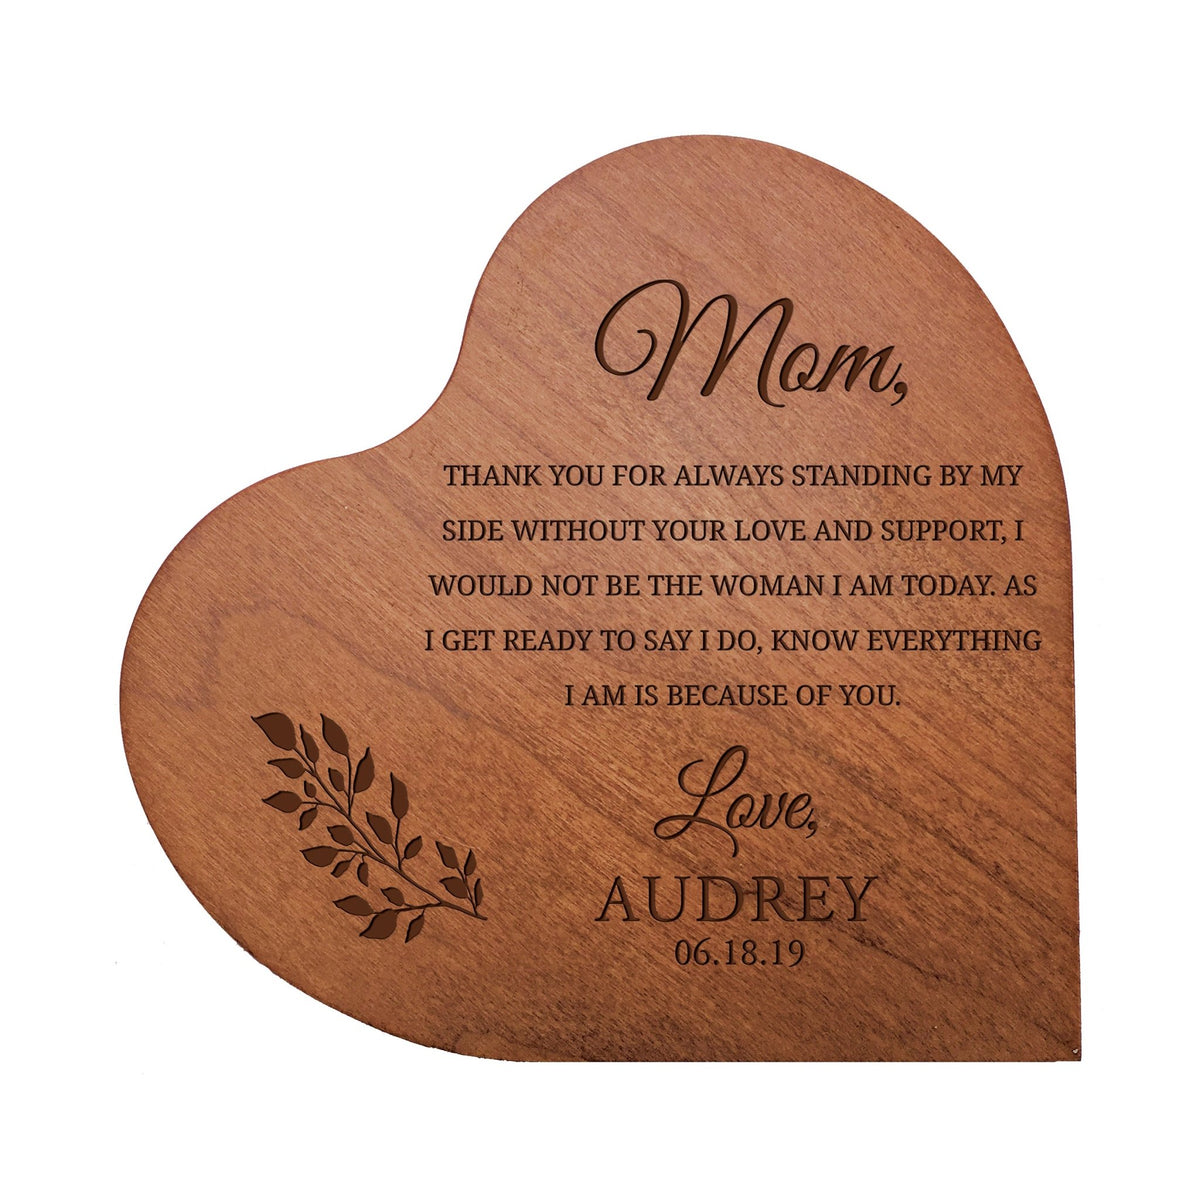 Personalized Modern Mother’s Love Solid Wood Heart Decoration With Inspirational Verse Keepsake Gift 5x5.25 - Mom, Thank You For Always = Love And Support - LifeSong Milestones